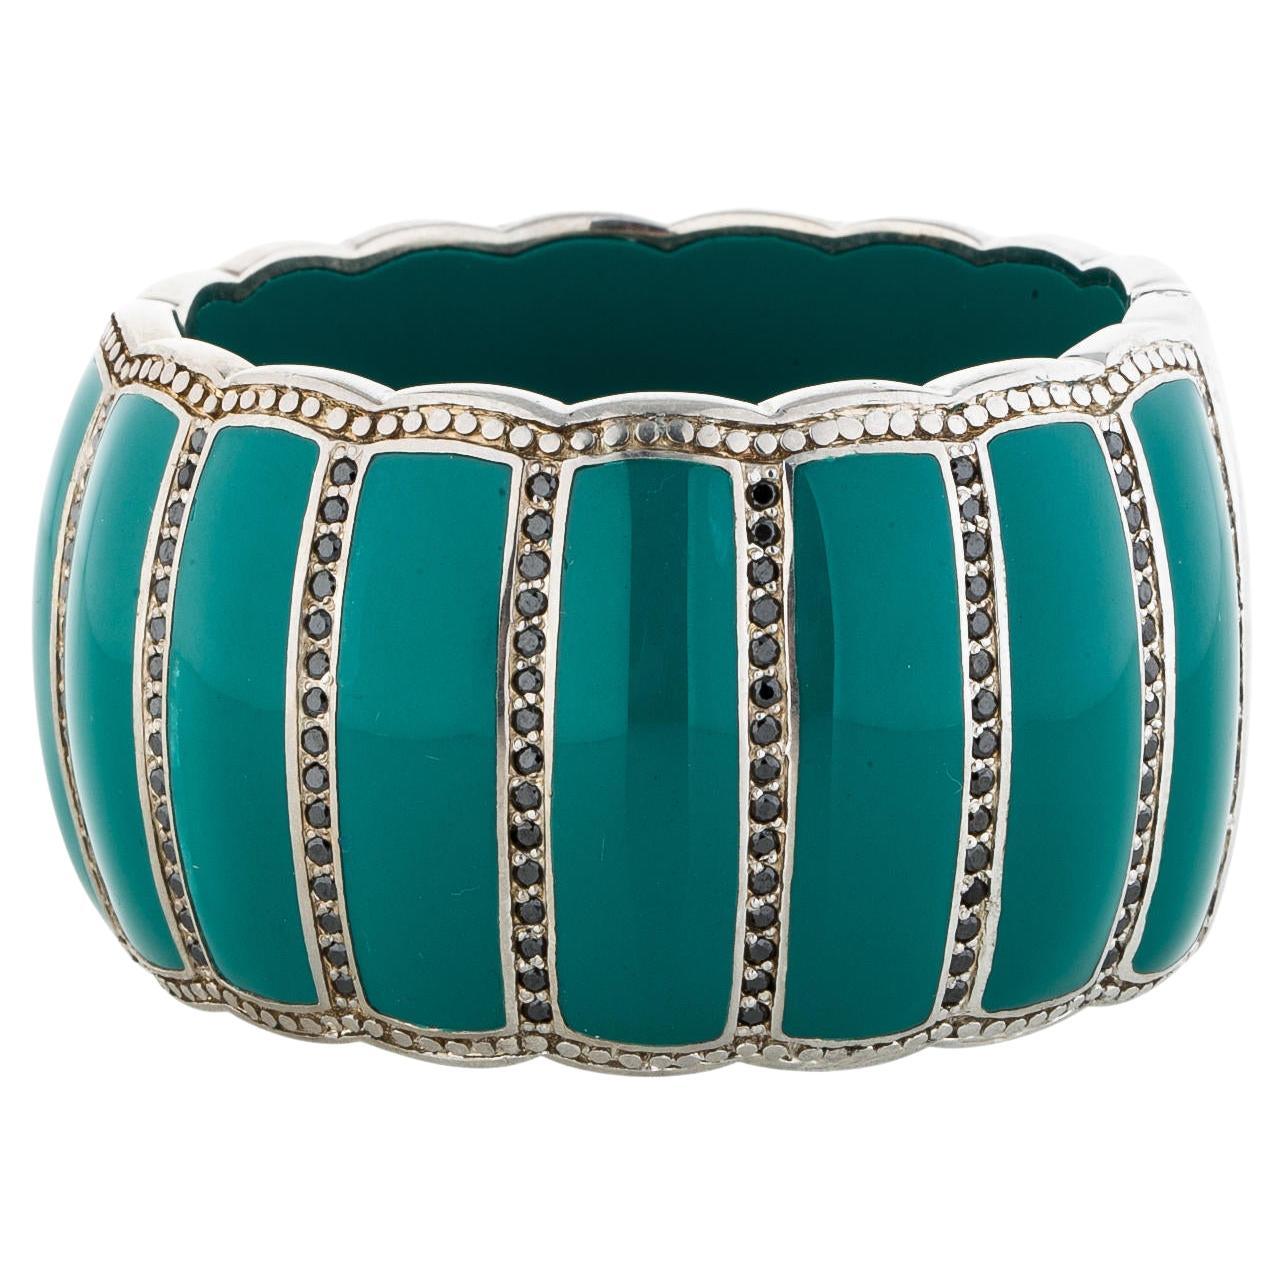 Miriam Salat Art Deco Turquoise Resin and Sterling Silver Cuff & Topaz